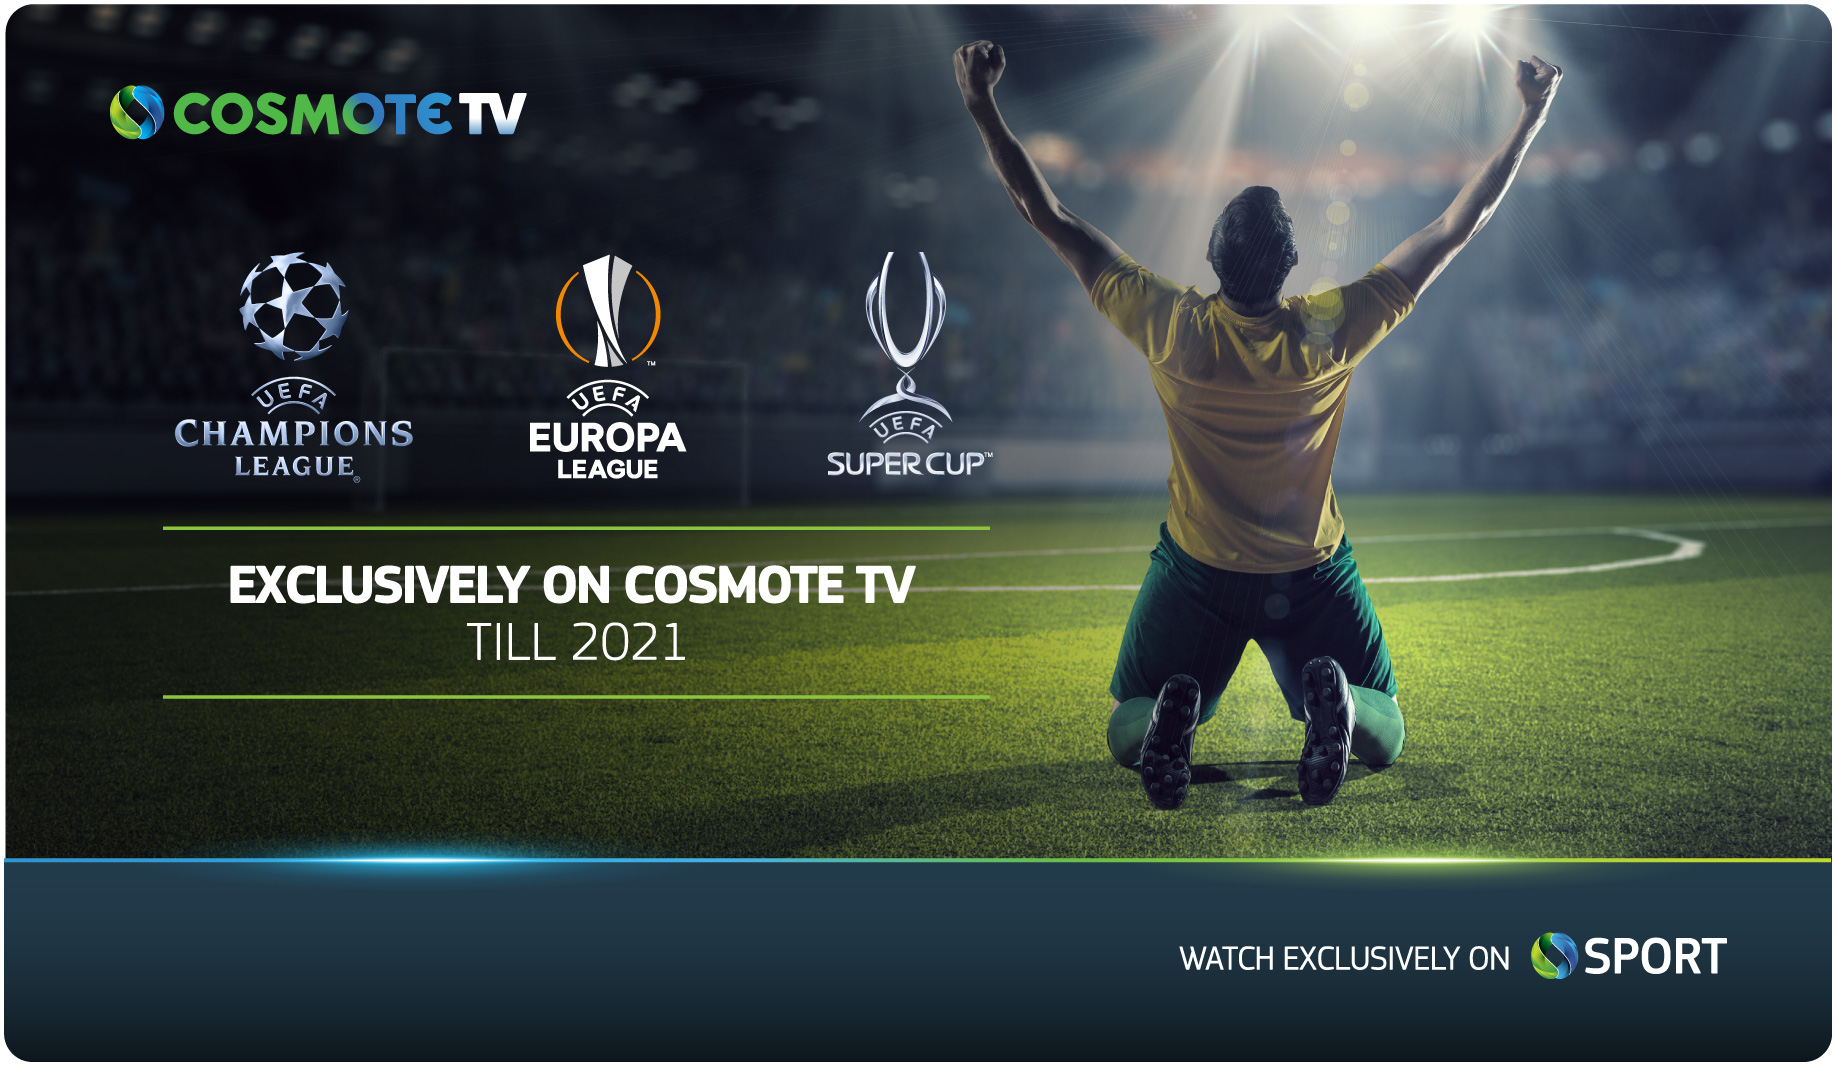 Cosmote TV secures Champions League 